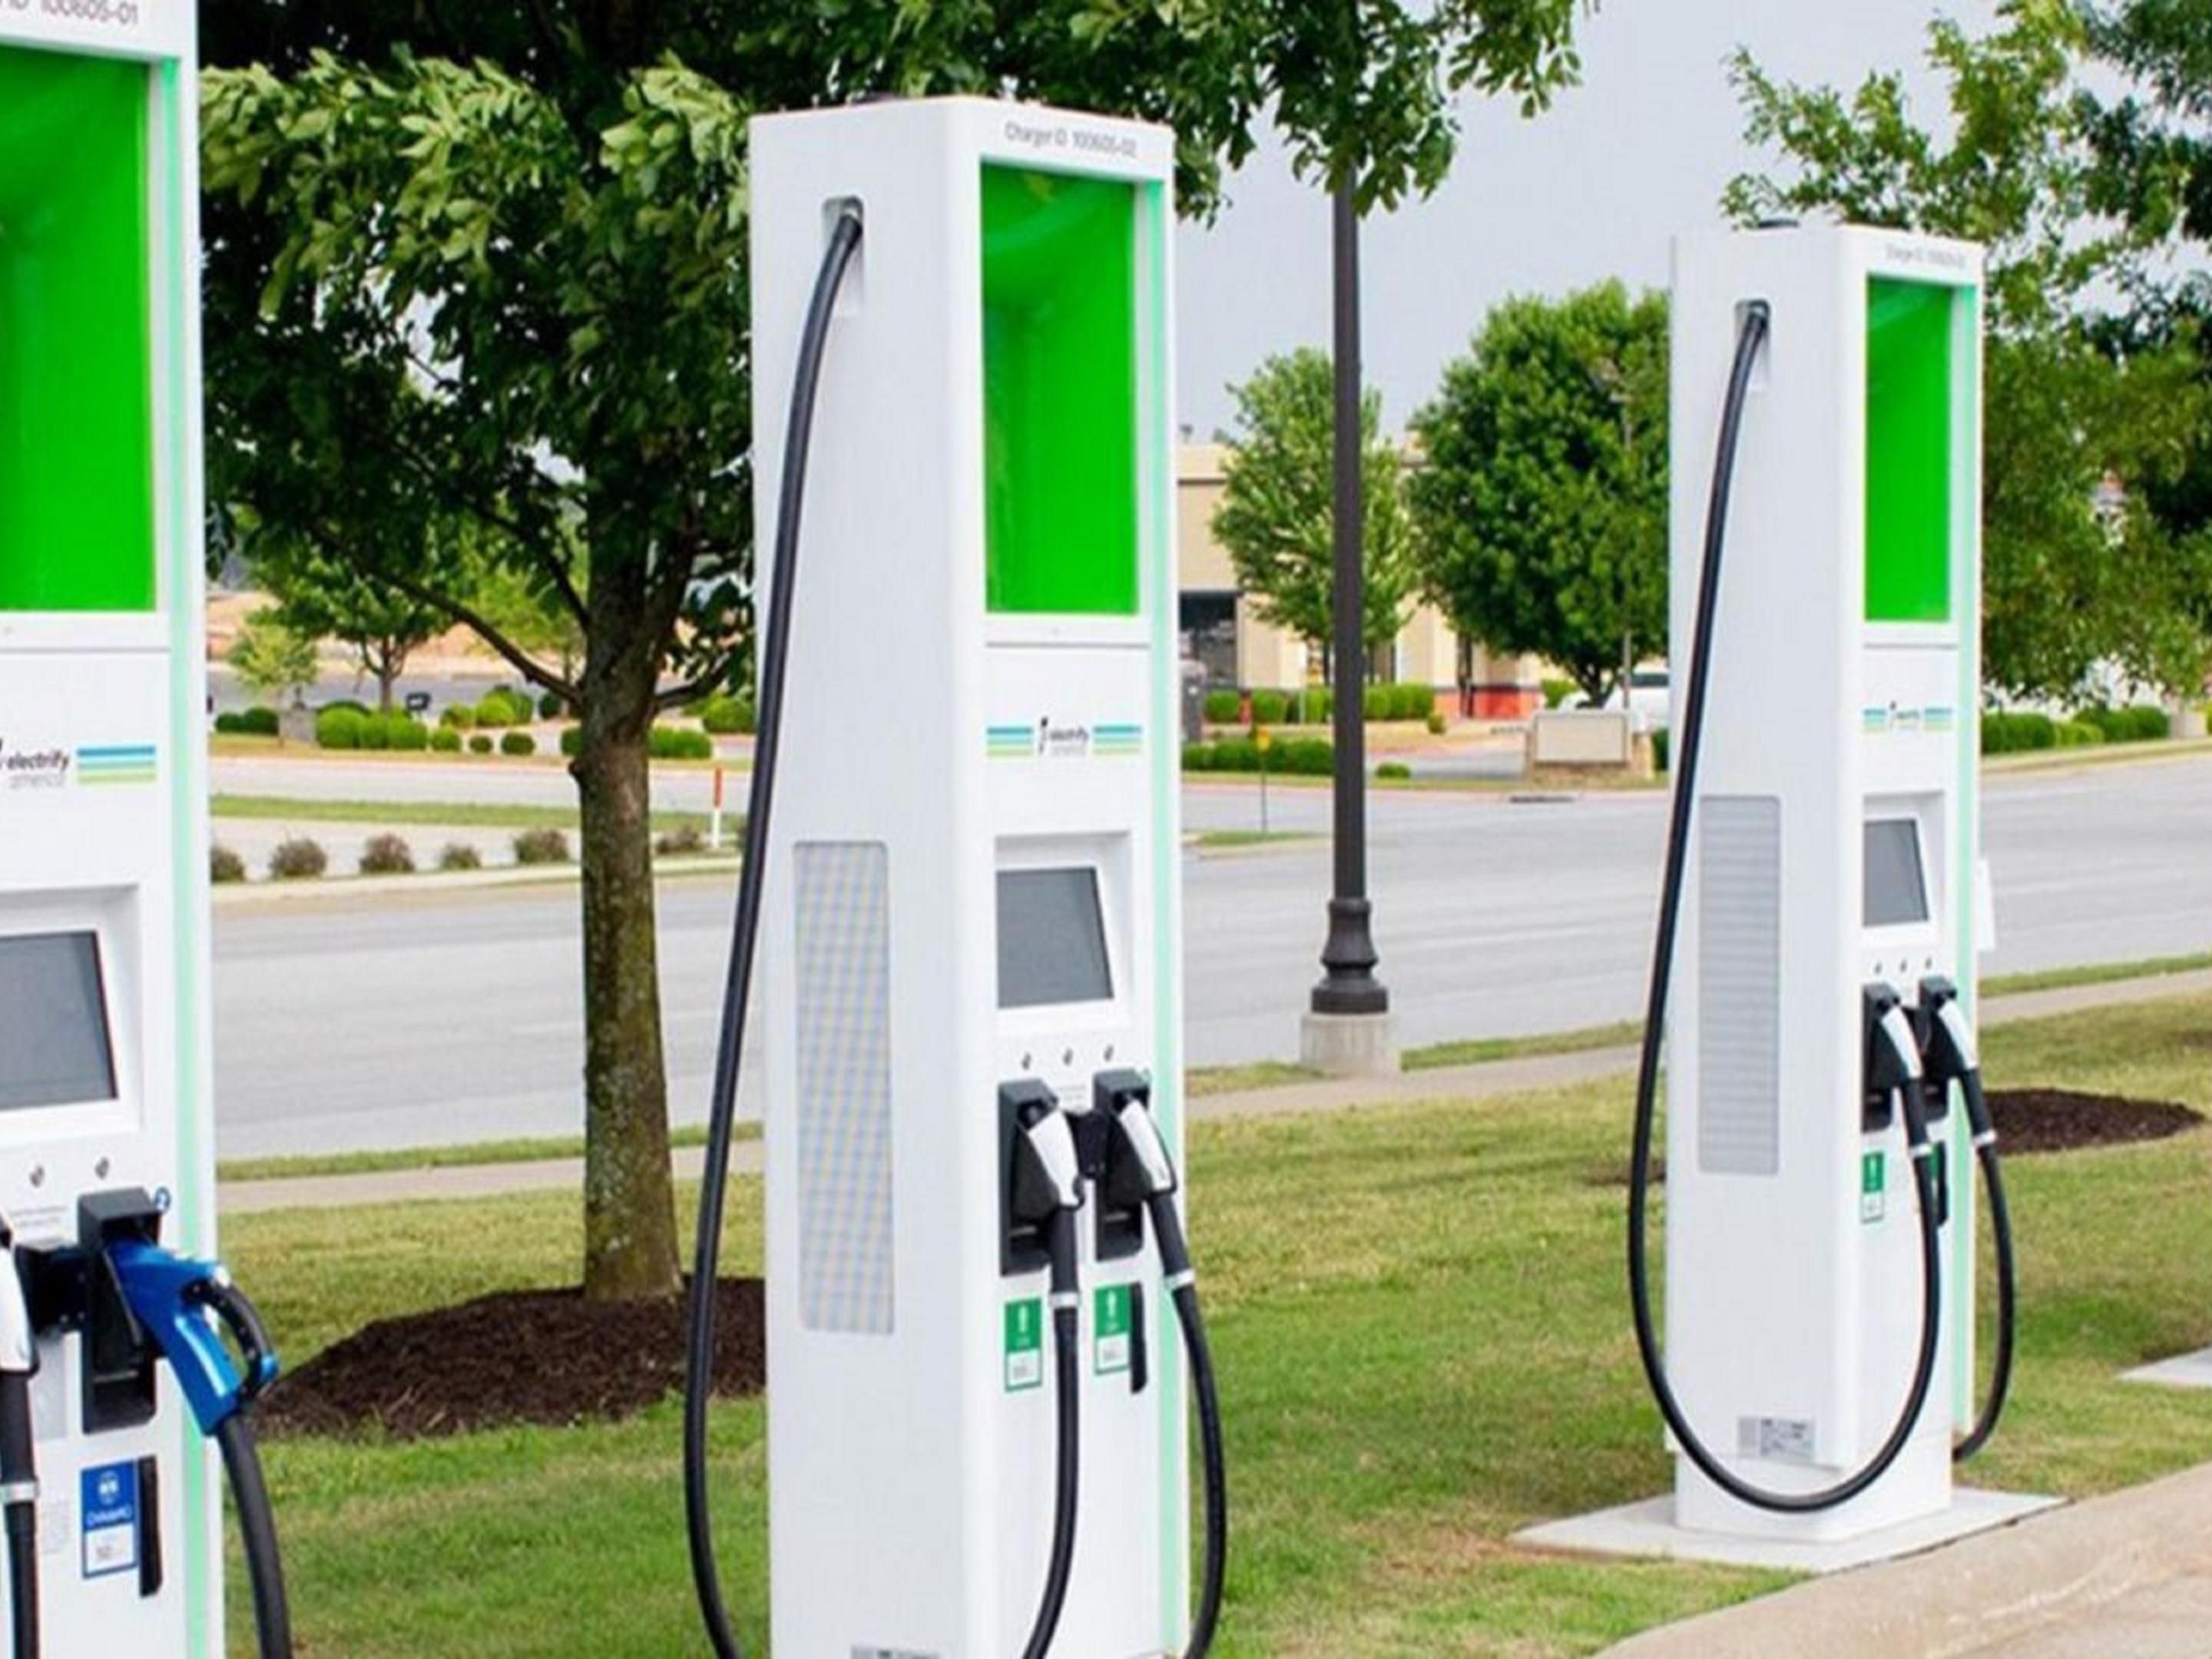 Enjoy electric charging stations at our facility.